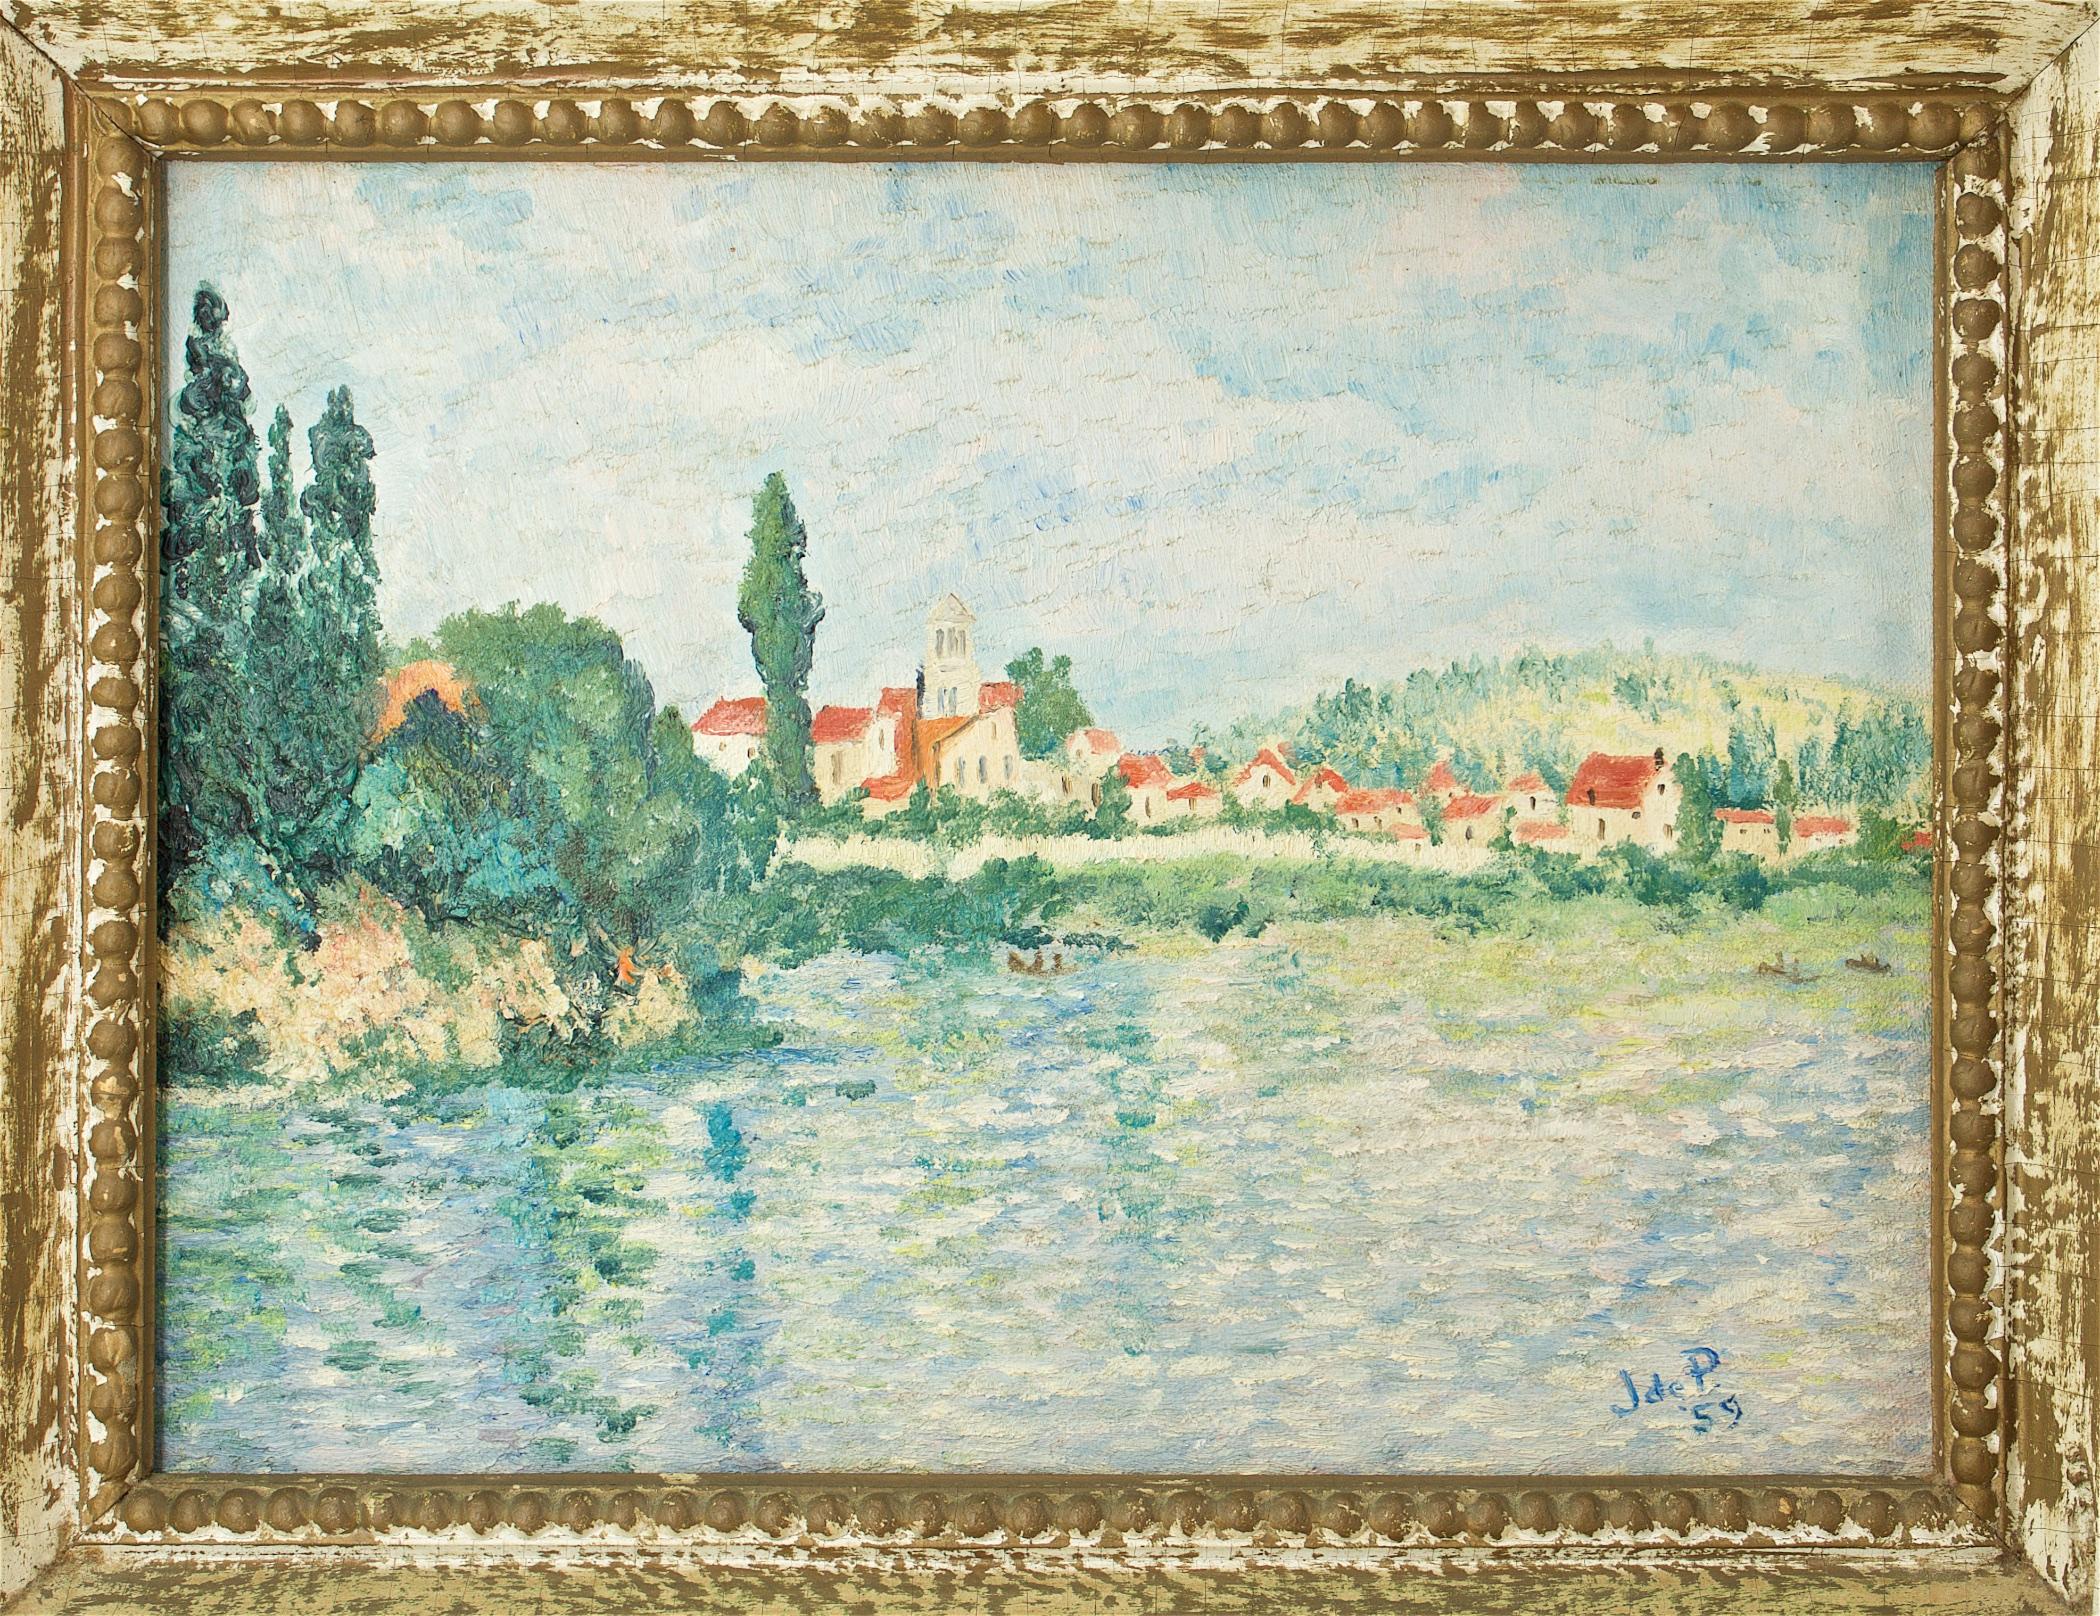 A wonderful late 1950s Parisian oil painting, a tourist street souvenir, painted by J. de P. Vétheuil, originally by Claude Monet. In original frame. Oil on Board, pencil signed/dated on back, Feb. 59, etc. Image size: 12 x 9 in.

In August 1878 a